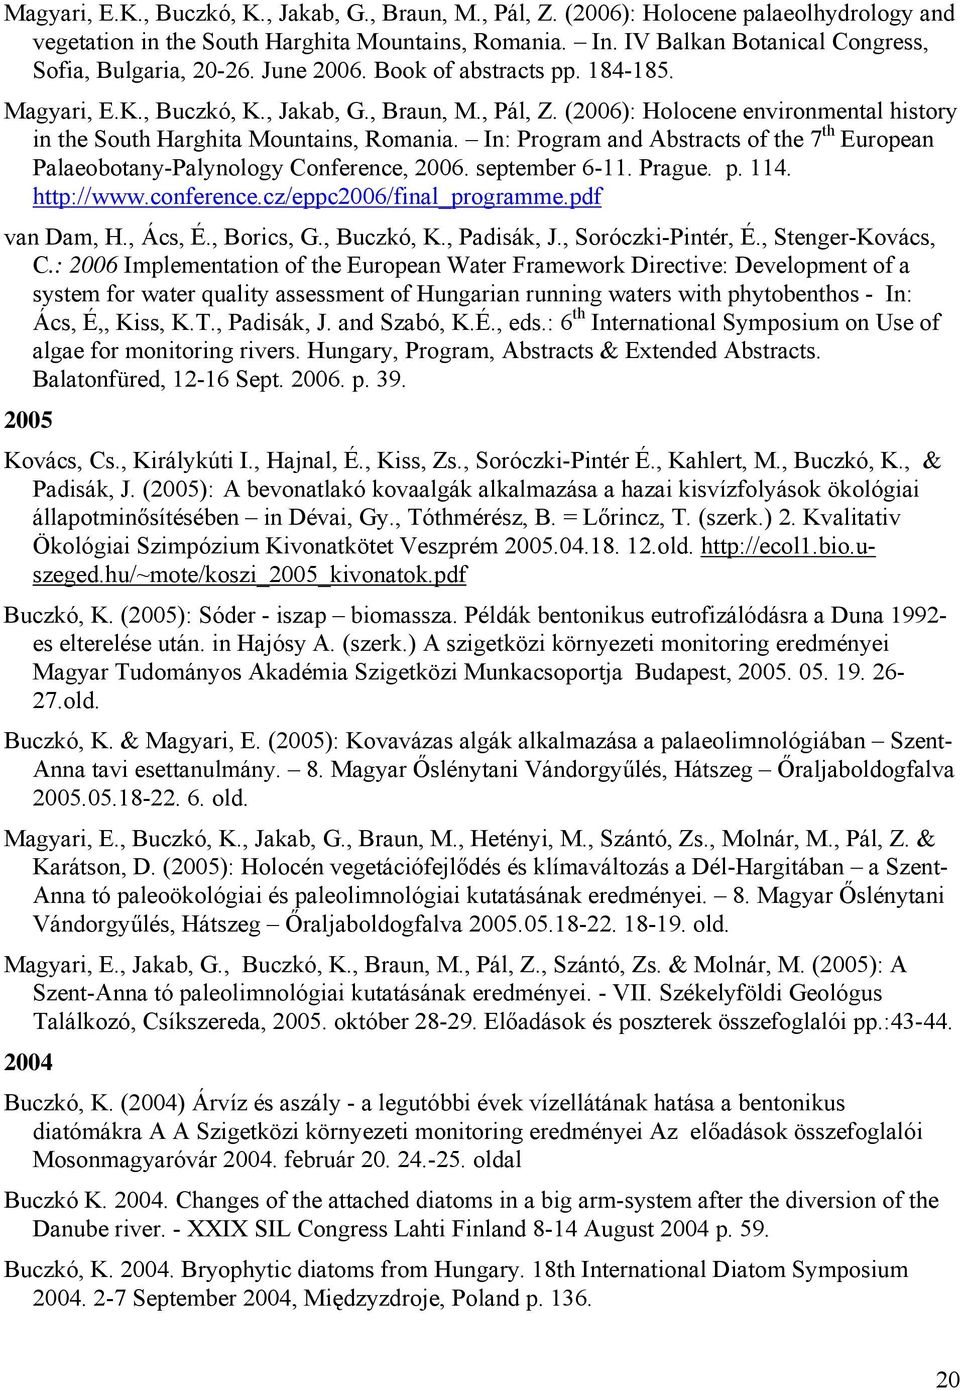 (2006): Holocene environmental history in the South Harghita Mountains, Romania. In: Program and Abstracts of the 7 th European Palaeobotany-Palynology Conference, 2006. september 6-11. Prague. p.